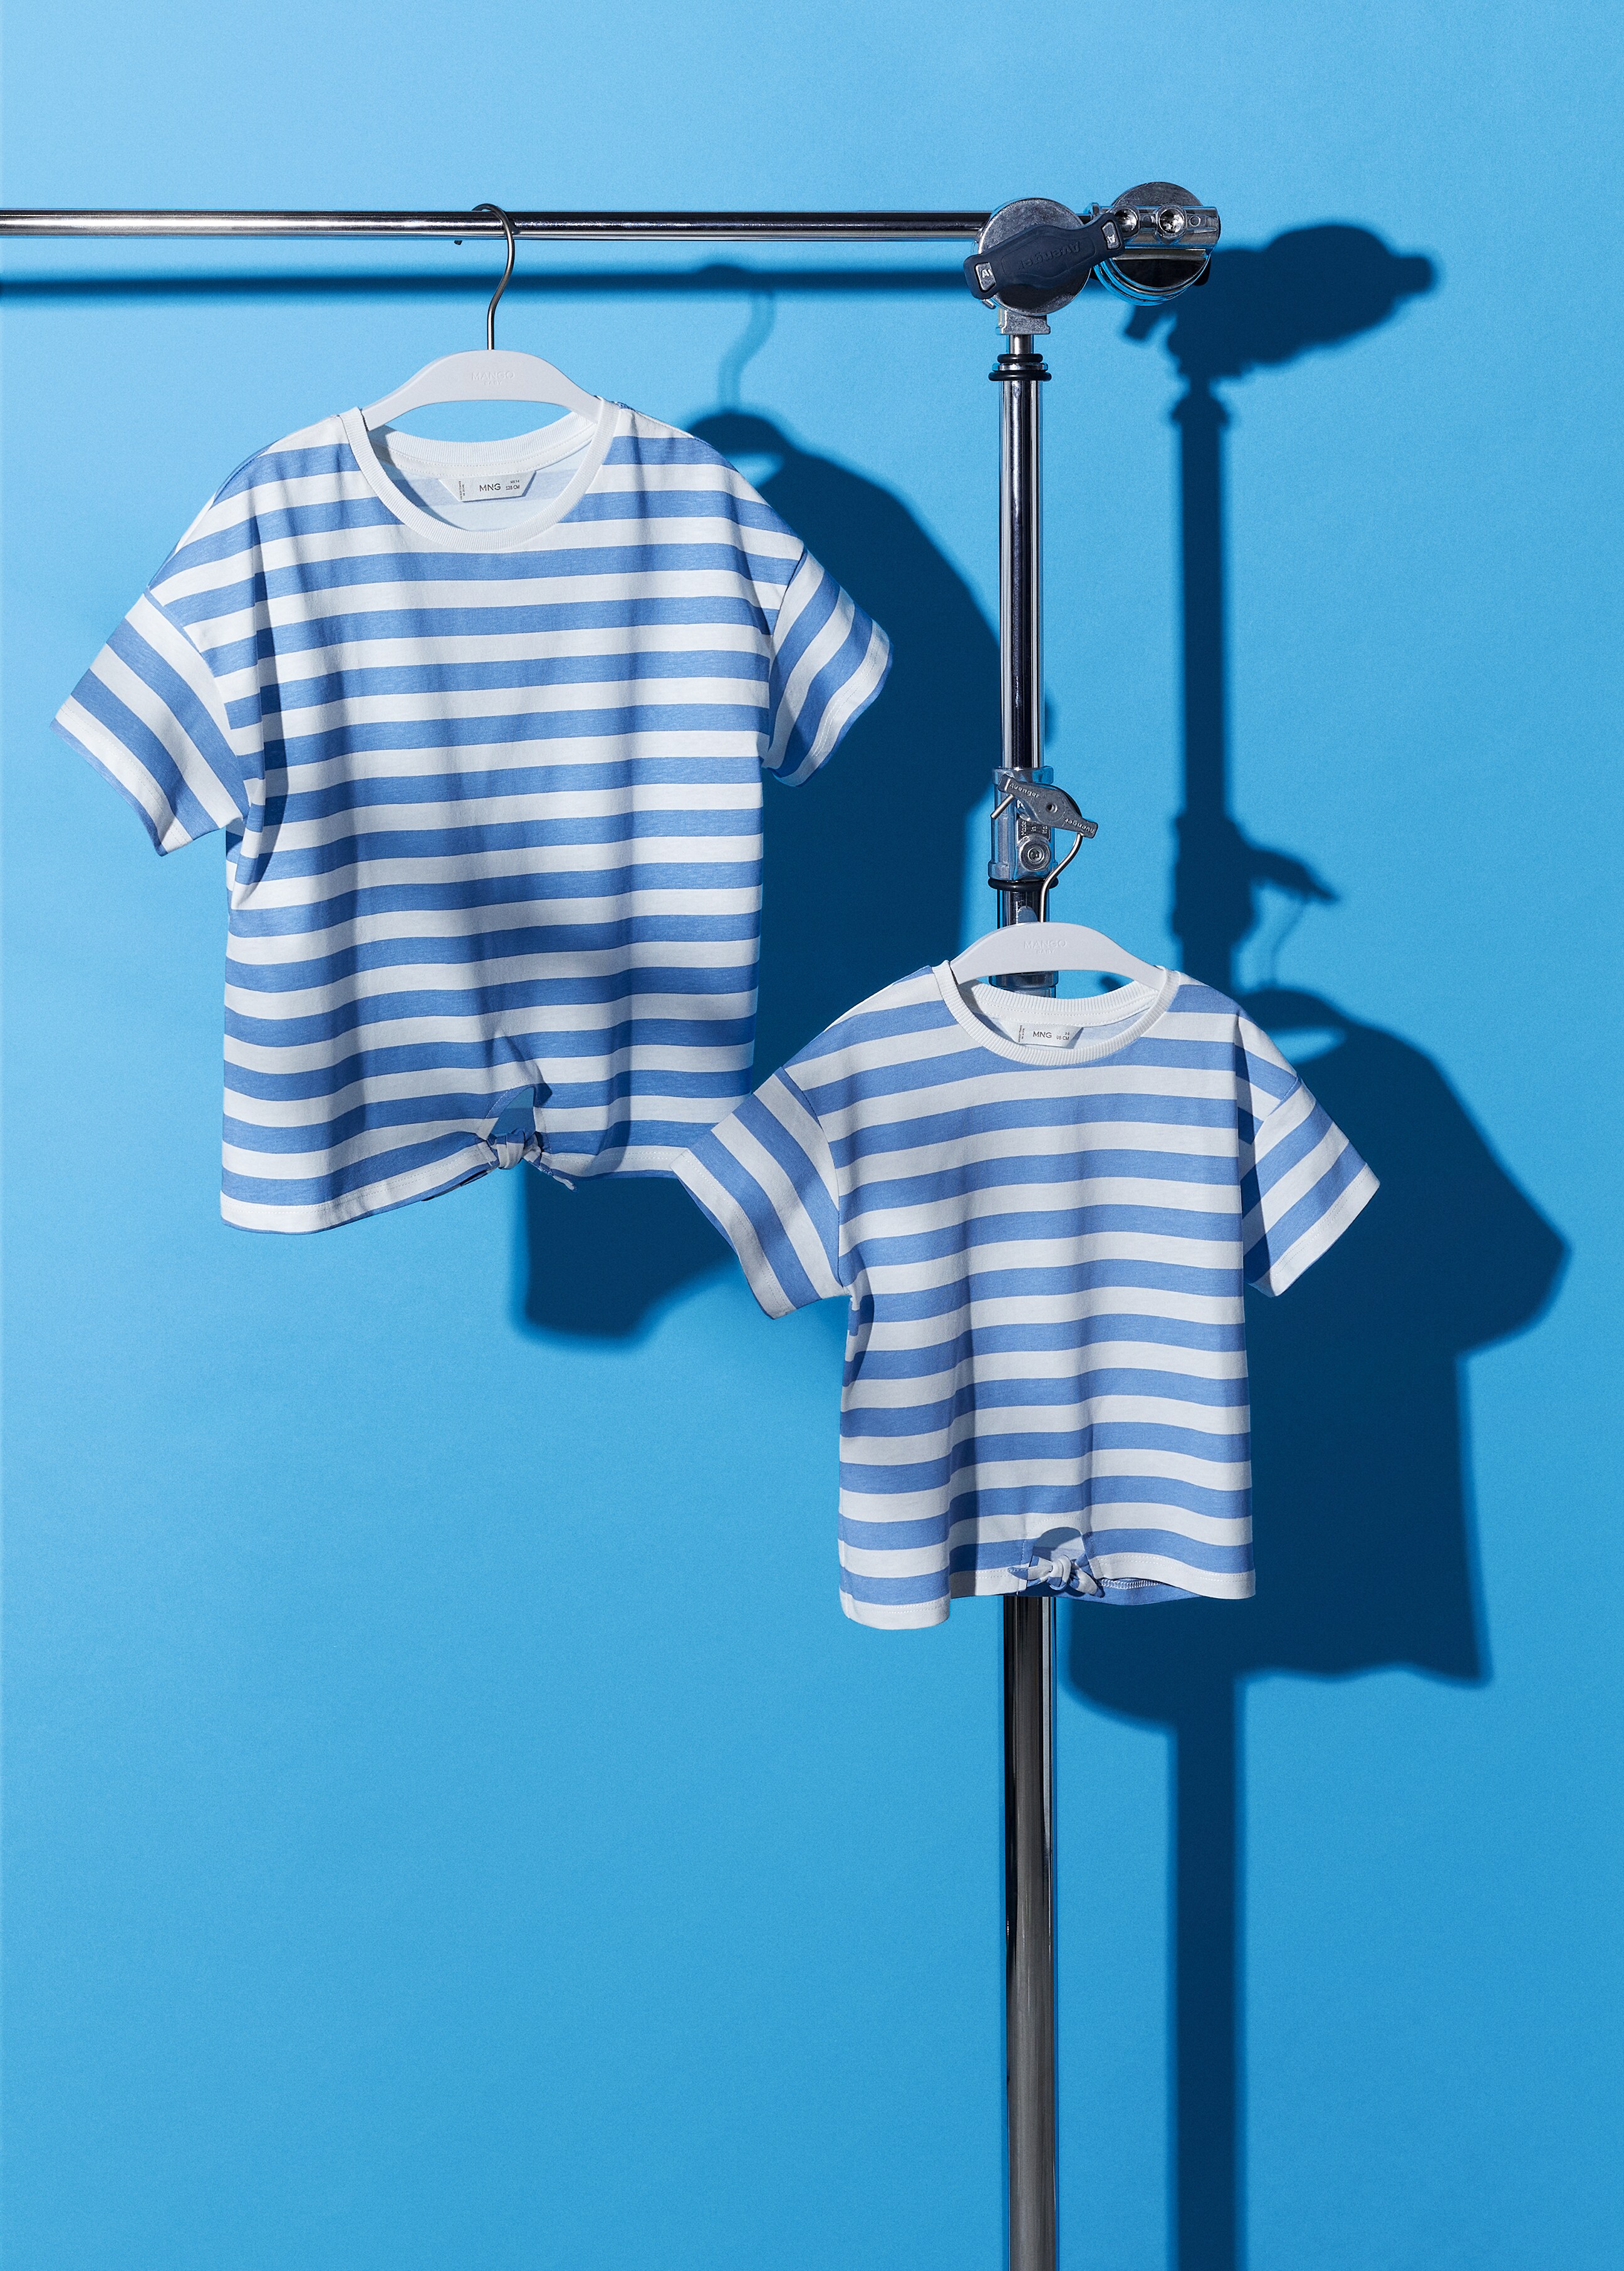 Knot striped T-shirt - Details of the article 5